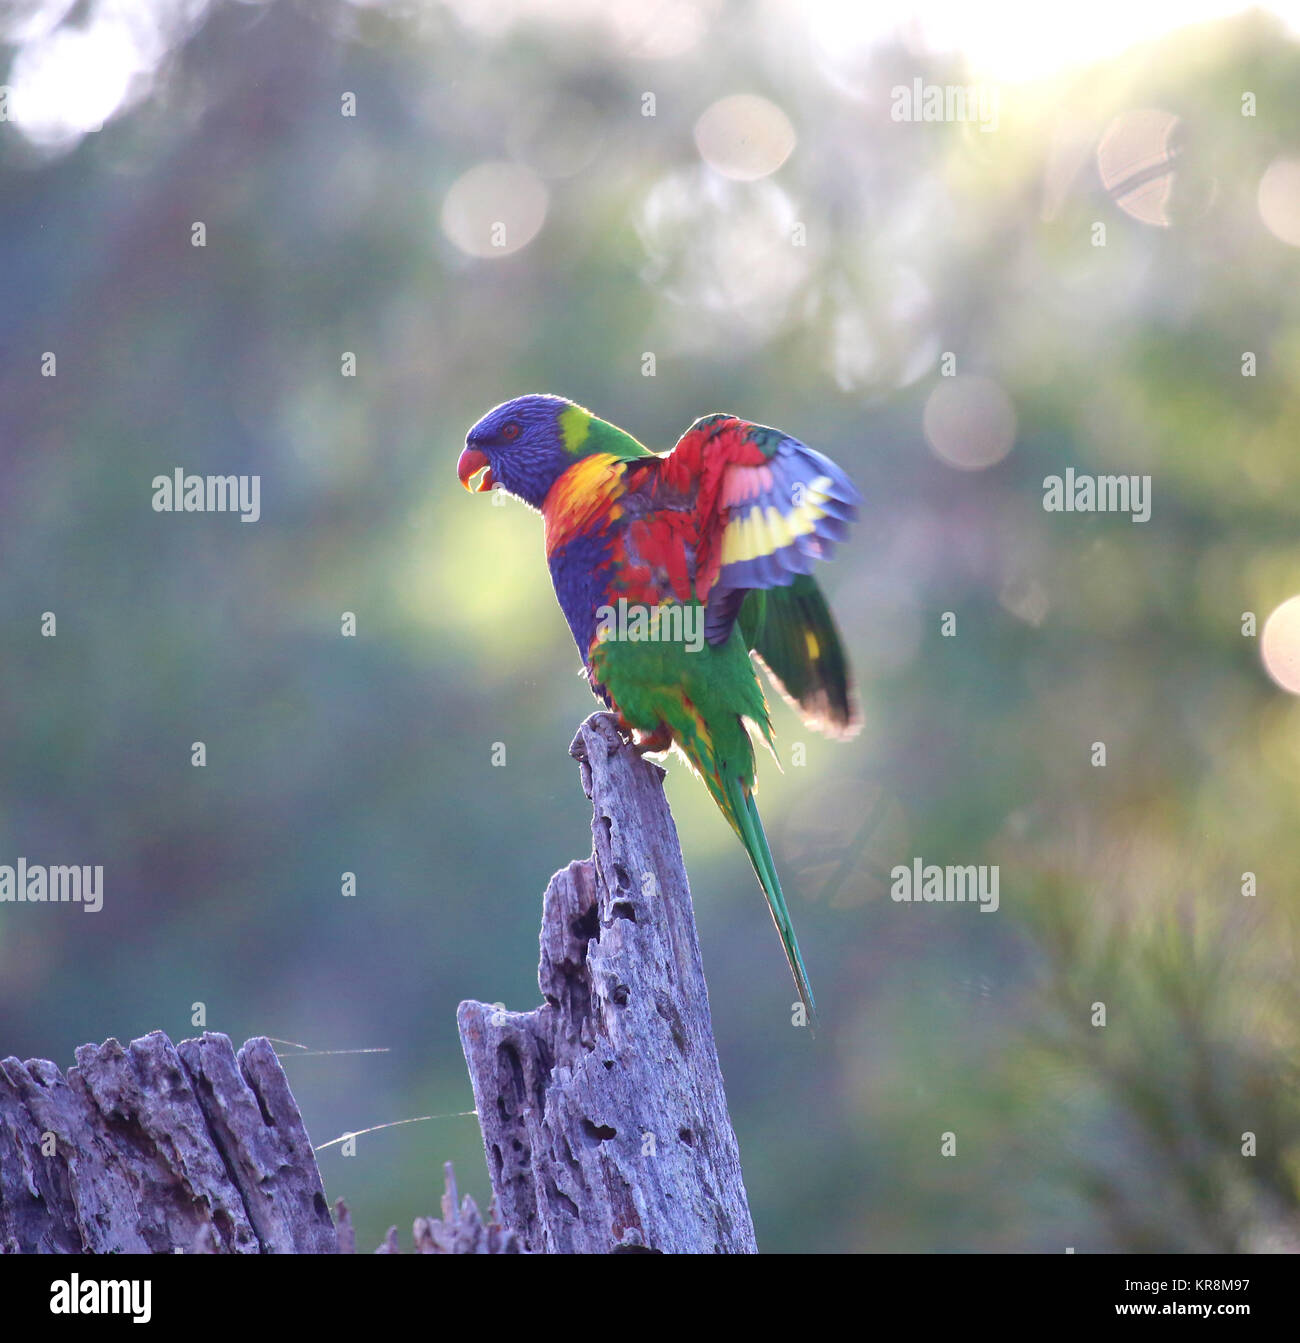 A Rainbow Lorikeet (Trichoglossus moluccanus) spreads its wings while sitting on top of a dead gum tree stump. Stock Photo